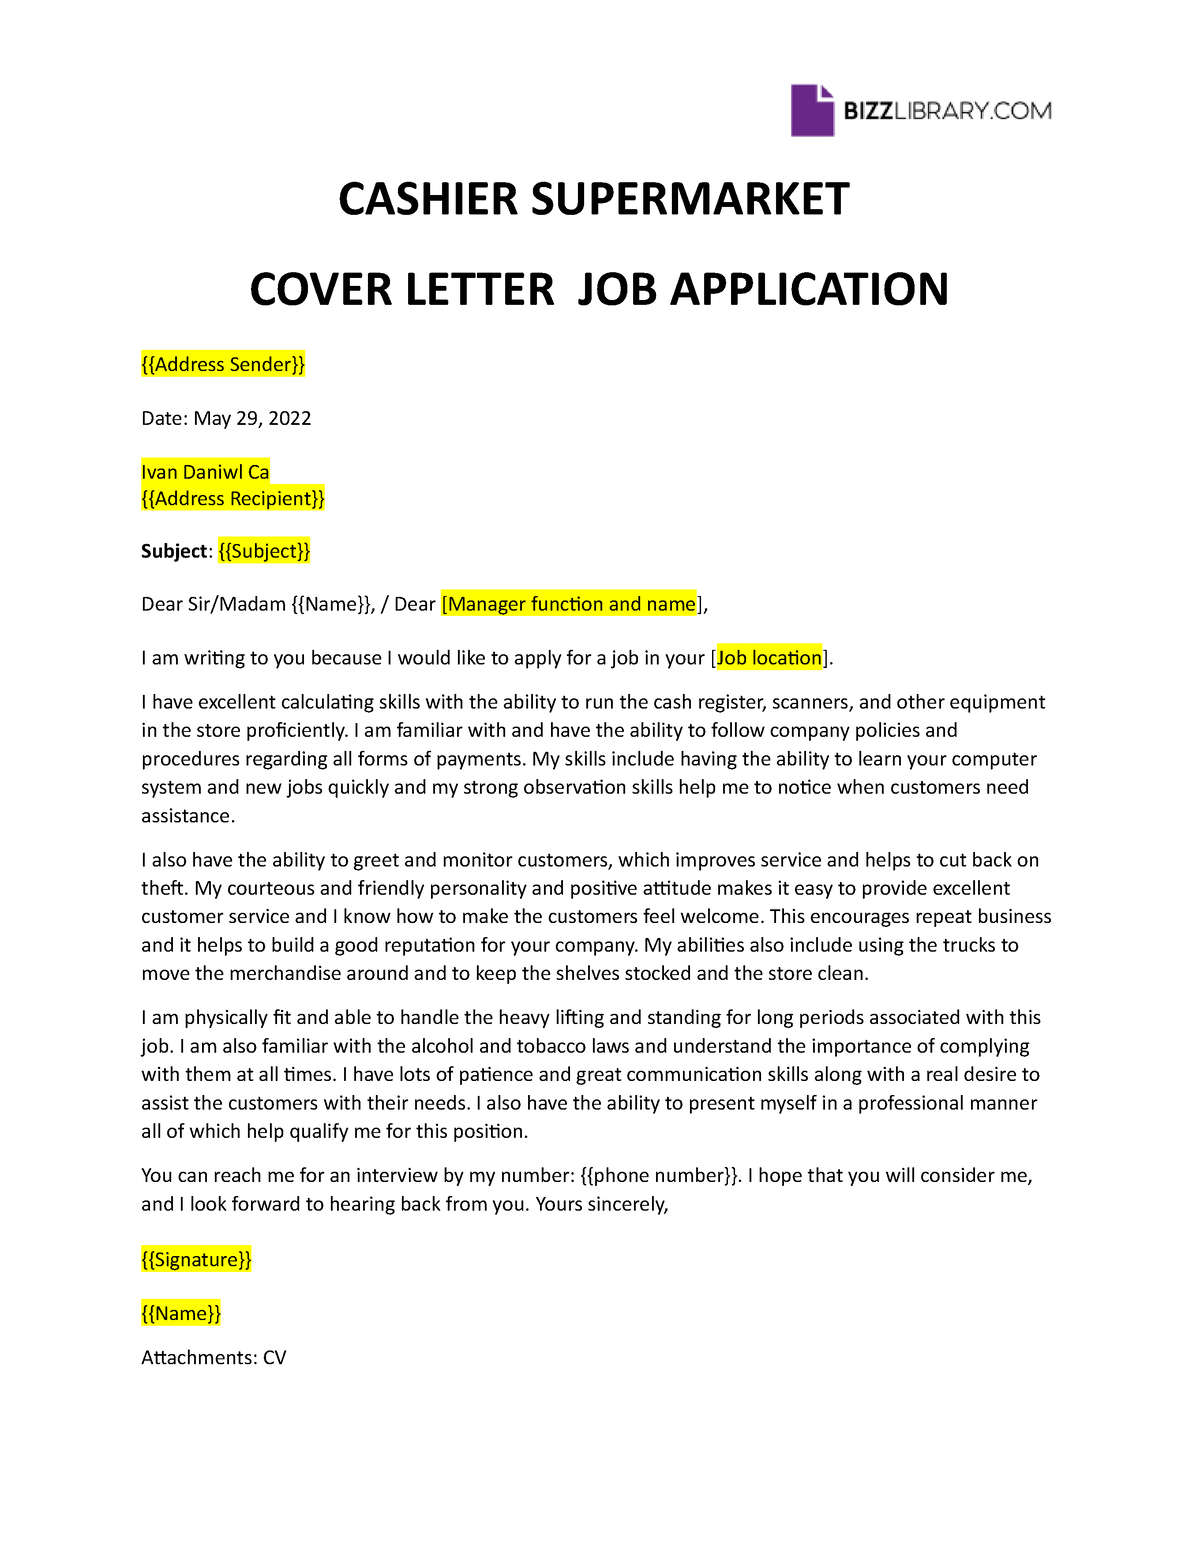 simple job application letter in a supermarket